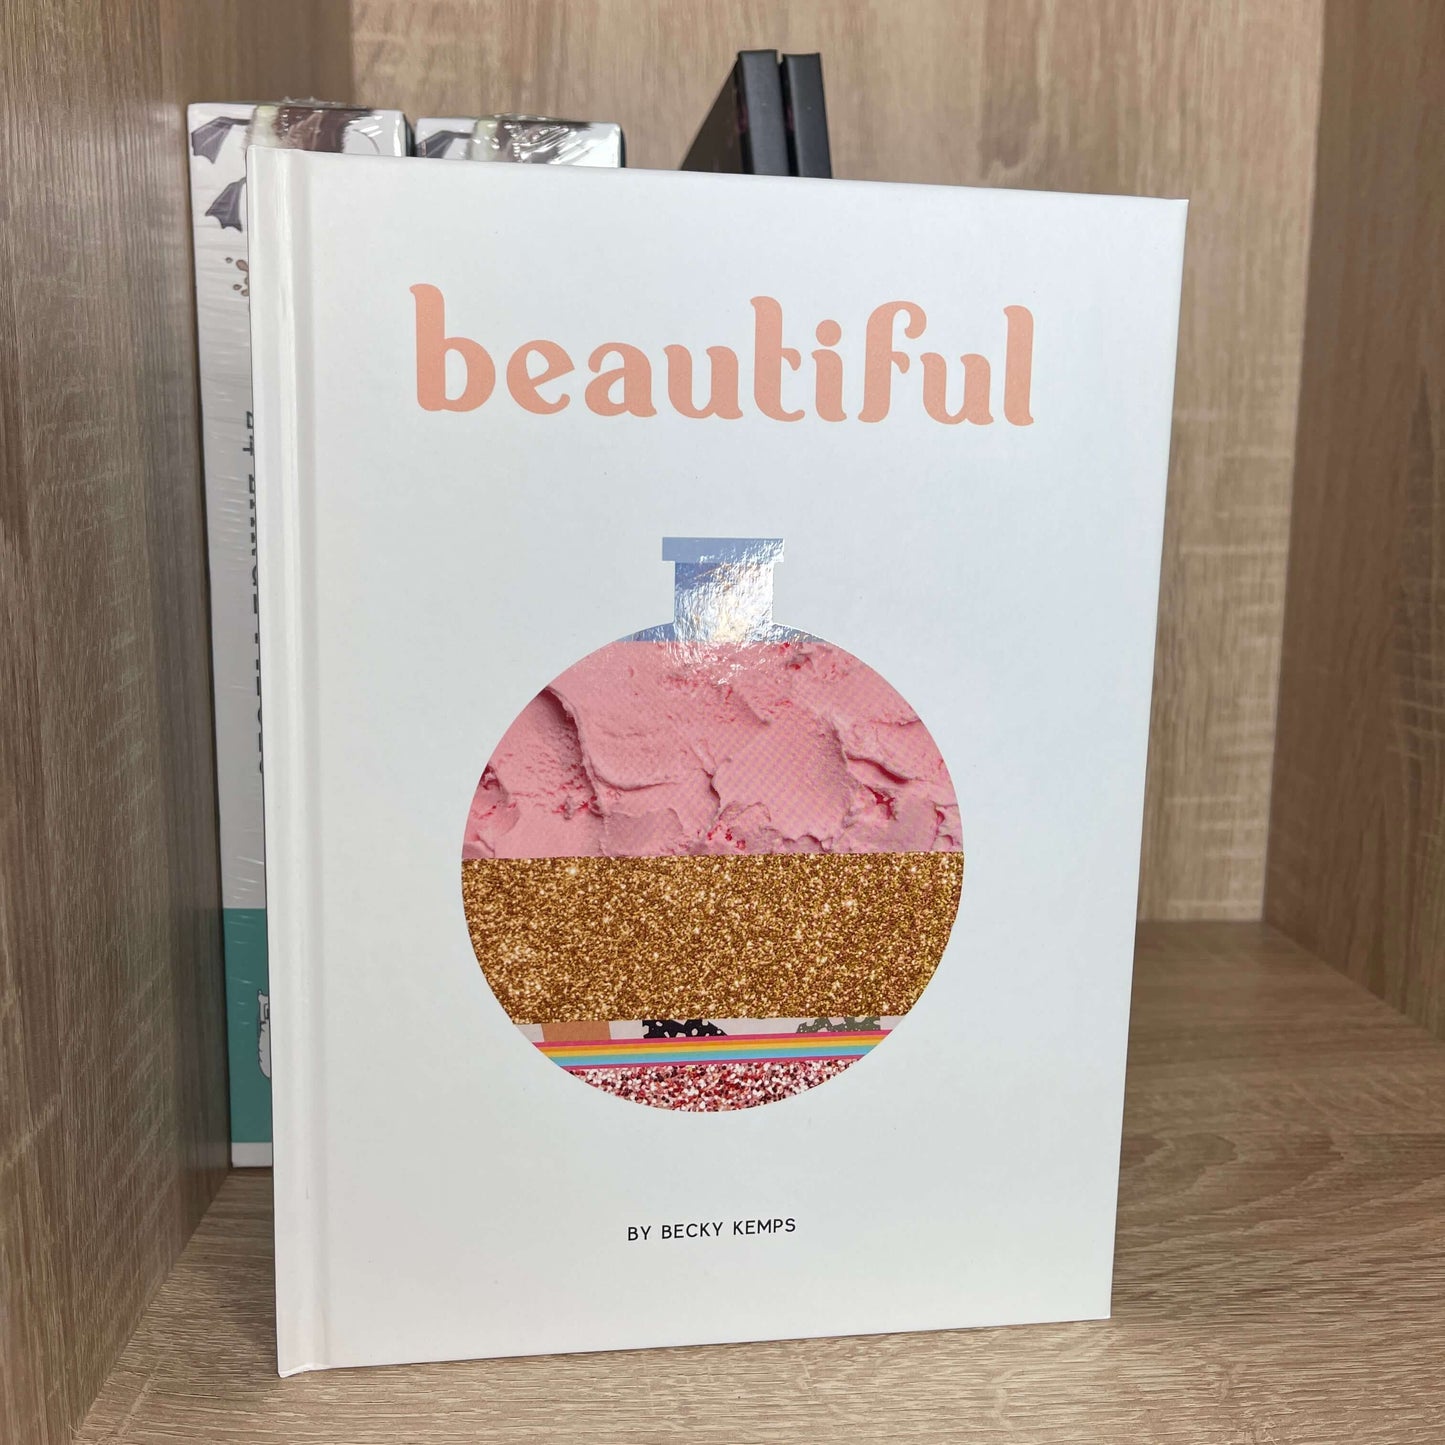 Cover for the book Beautiful by Becky Kemps.